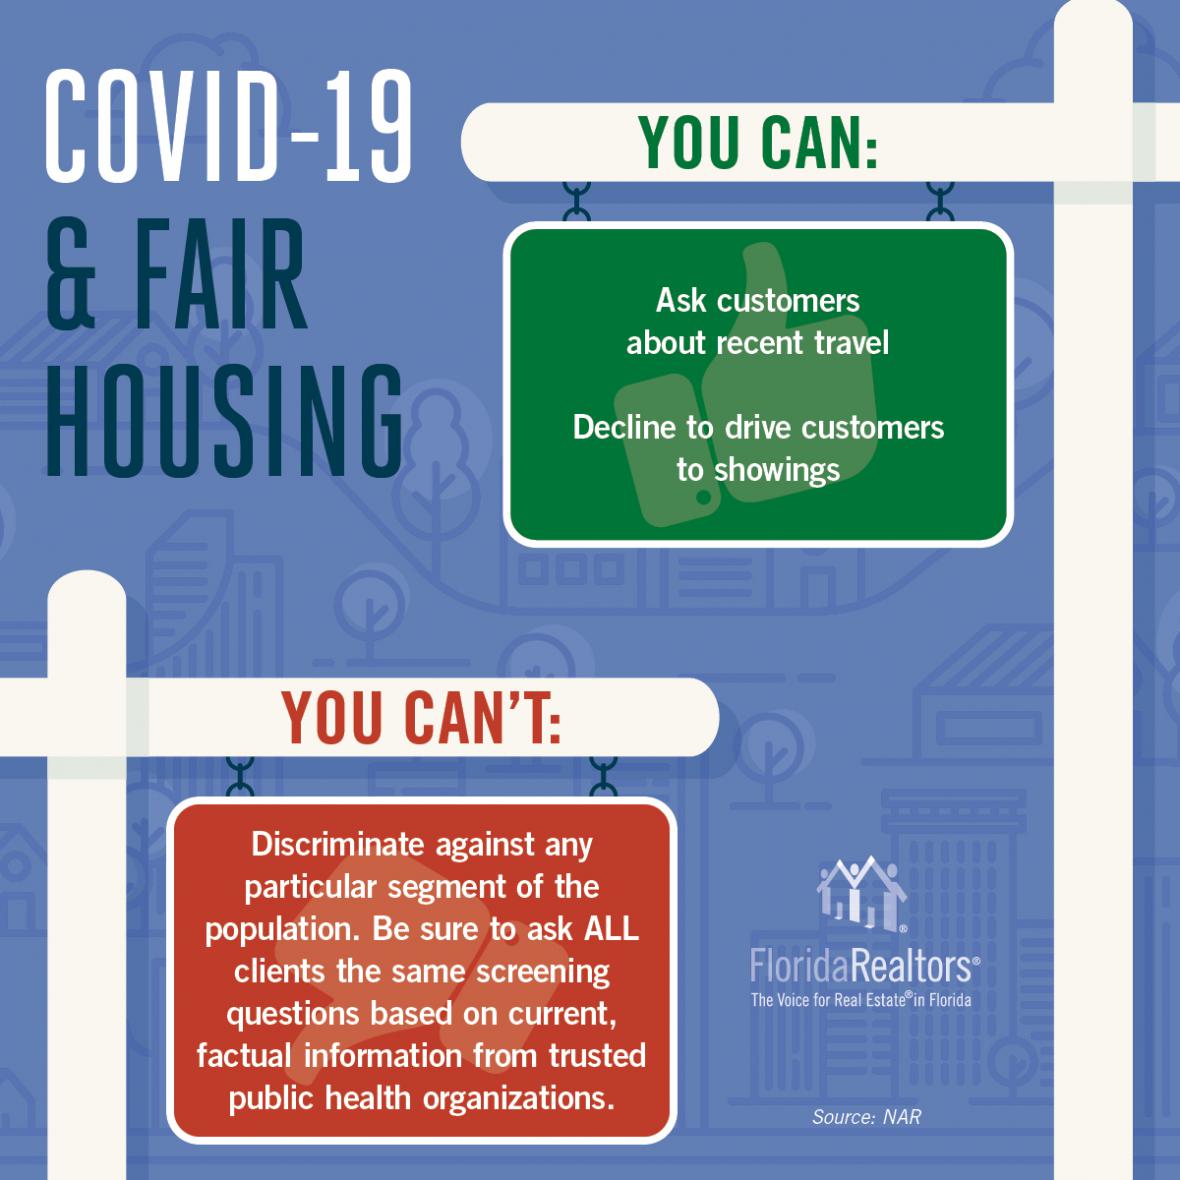 covid-19 and fair housing infographic